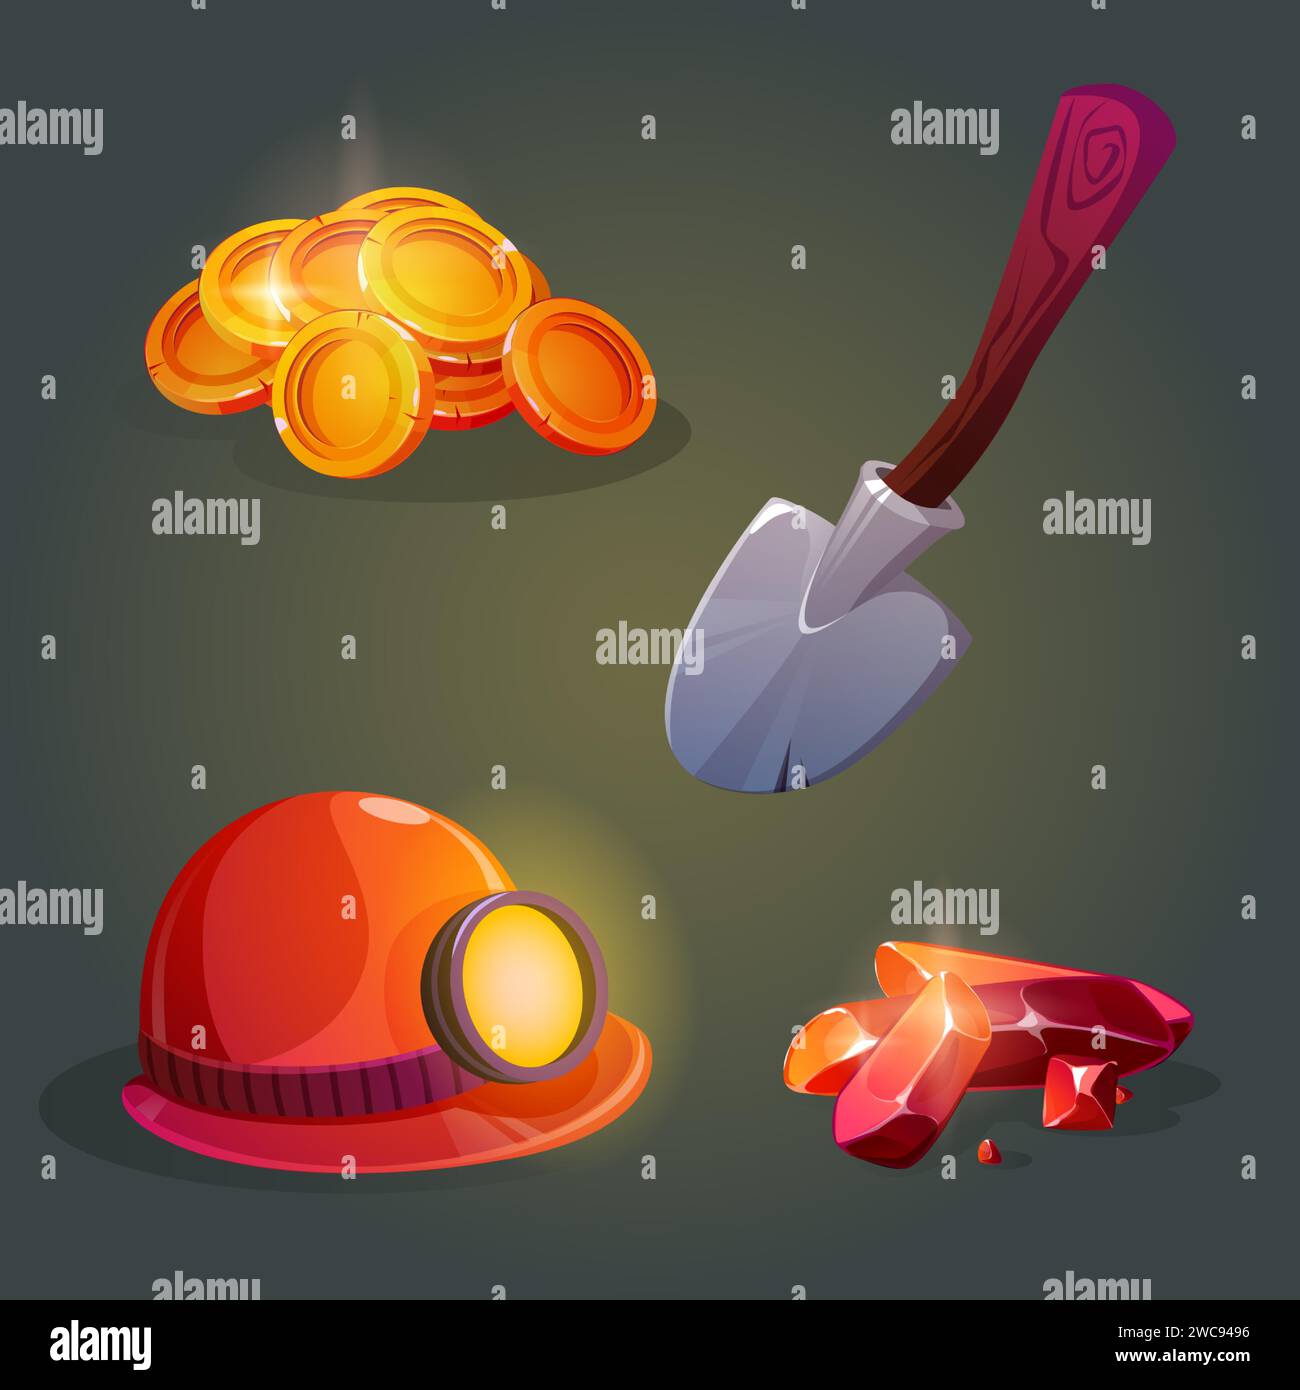 Gold and gemstone mine game icons. Cartoon vector set of gui assets of treasure miner - pile of golden coins and red shiny gems or diamond crystal, shovel with wooden handle and helmet with lamp. Stock Vector